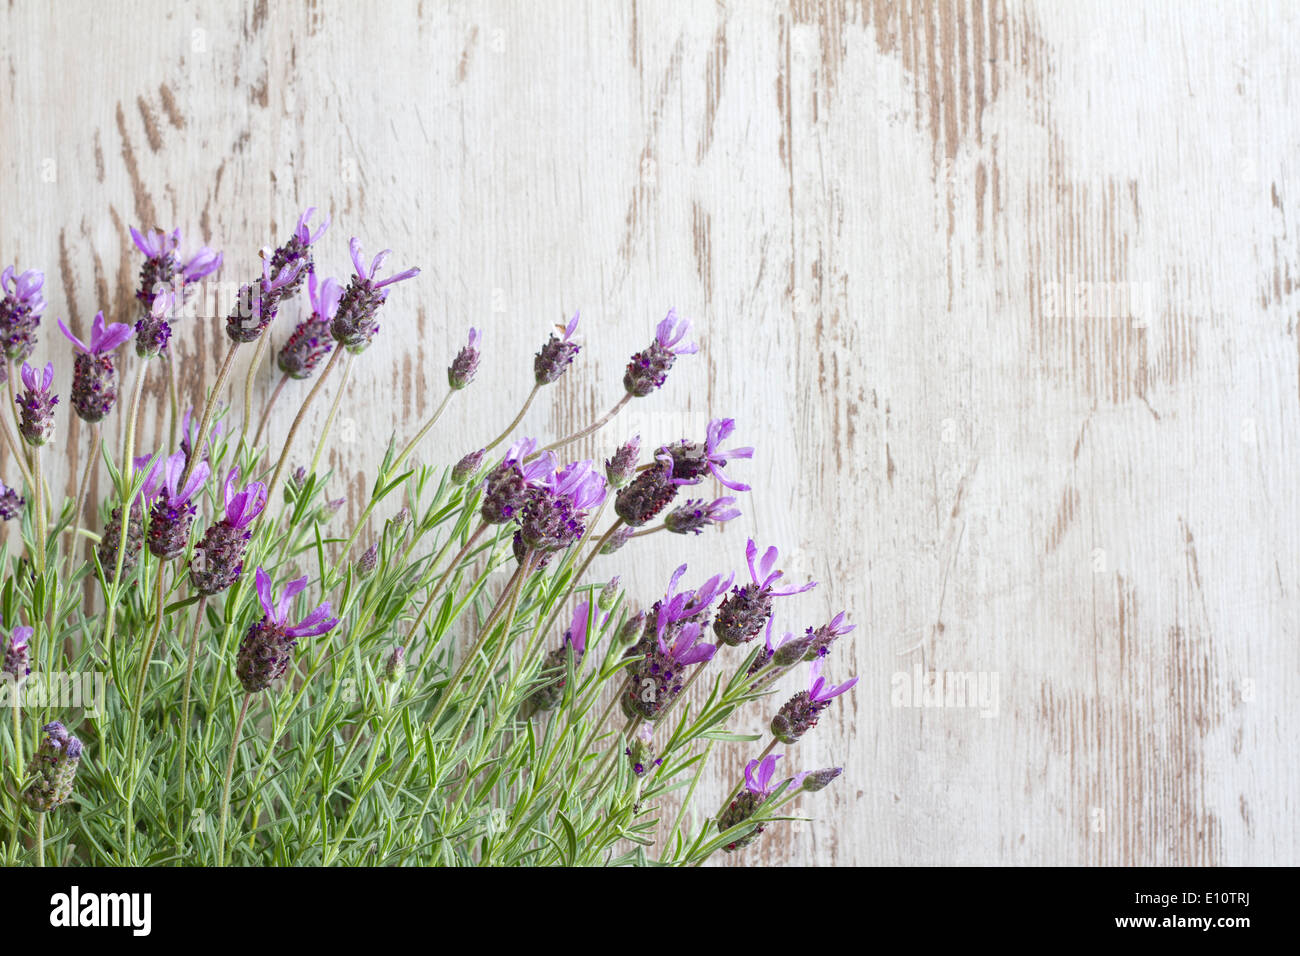 Lavender flowers on vintage wooden boards background concept Stock Photo